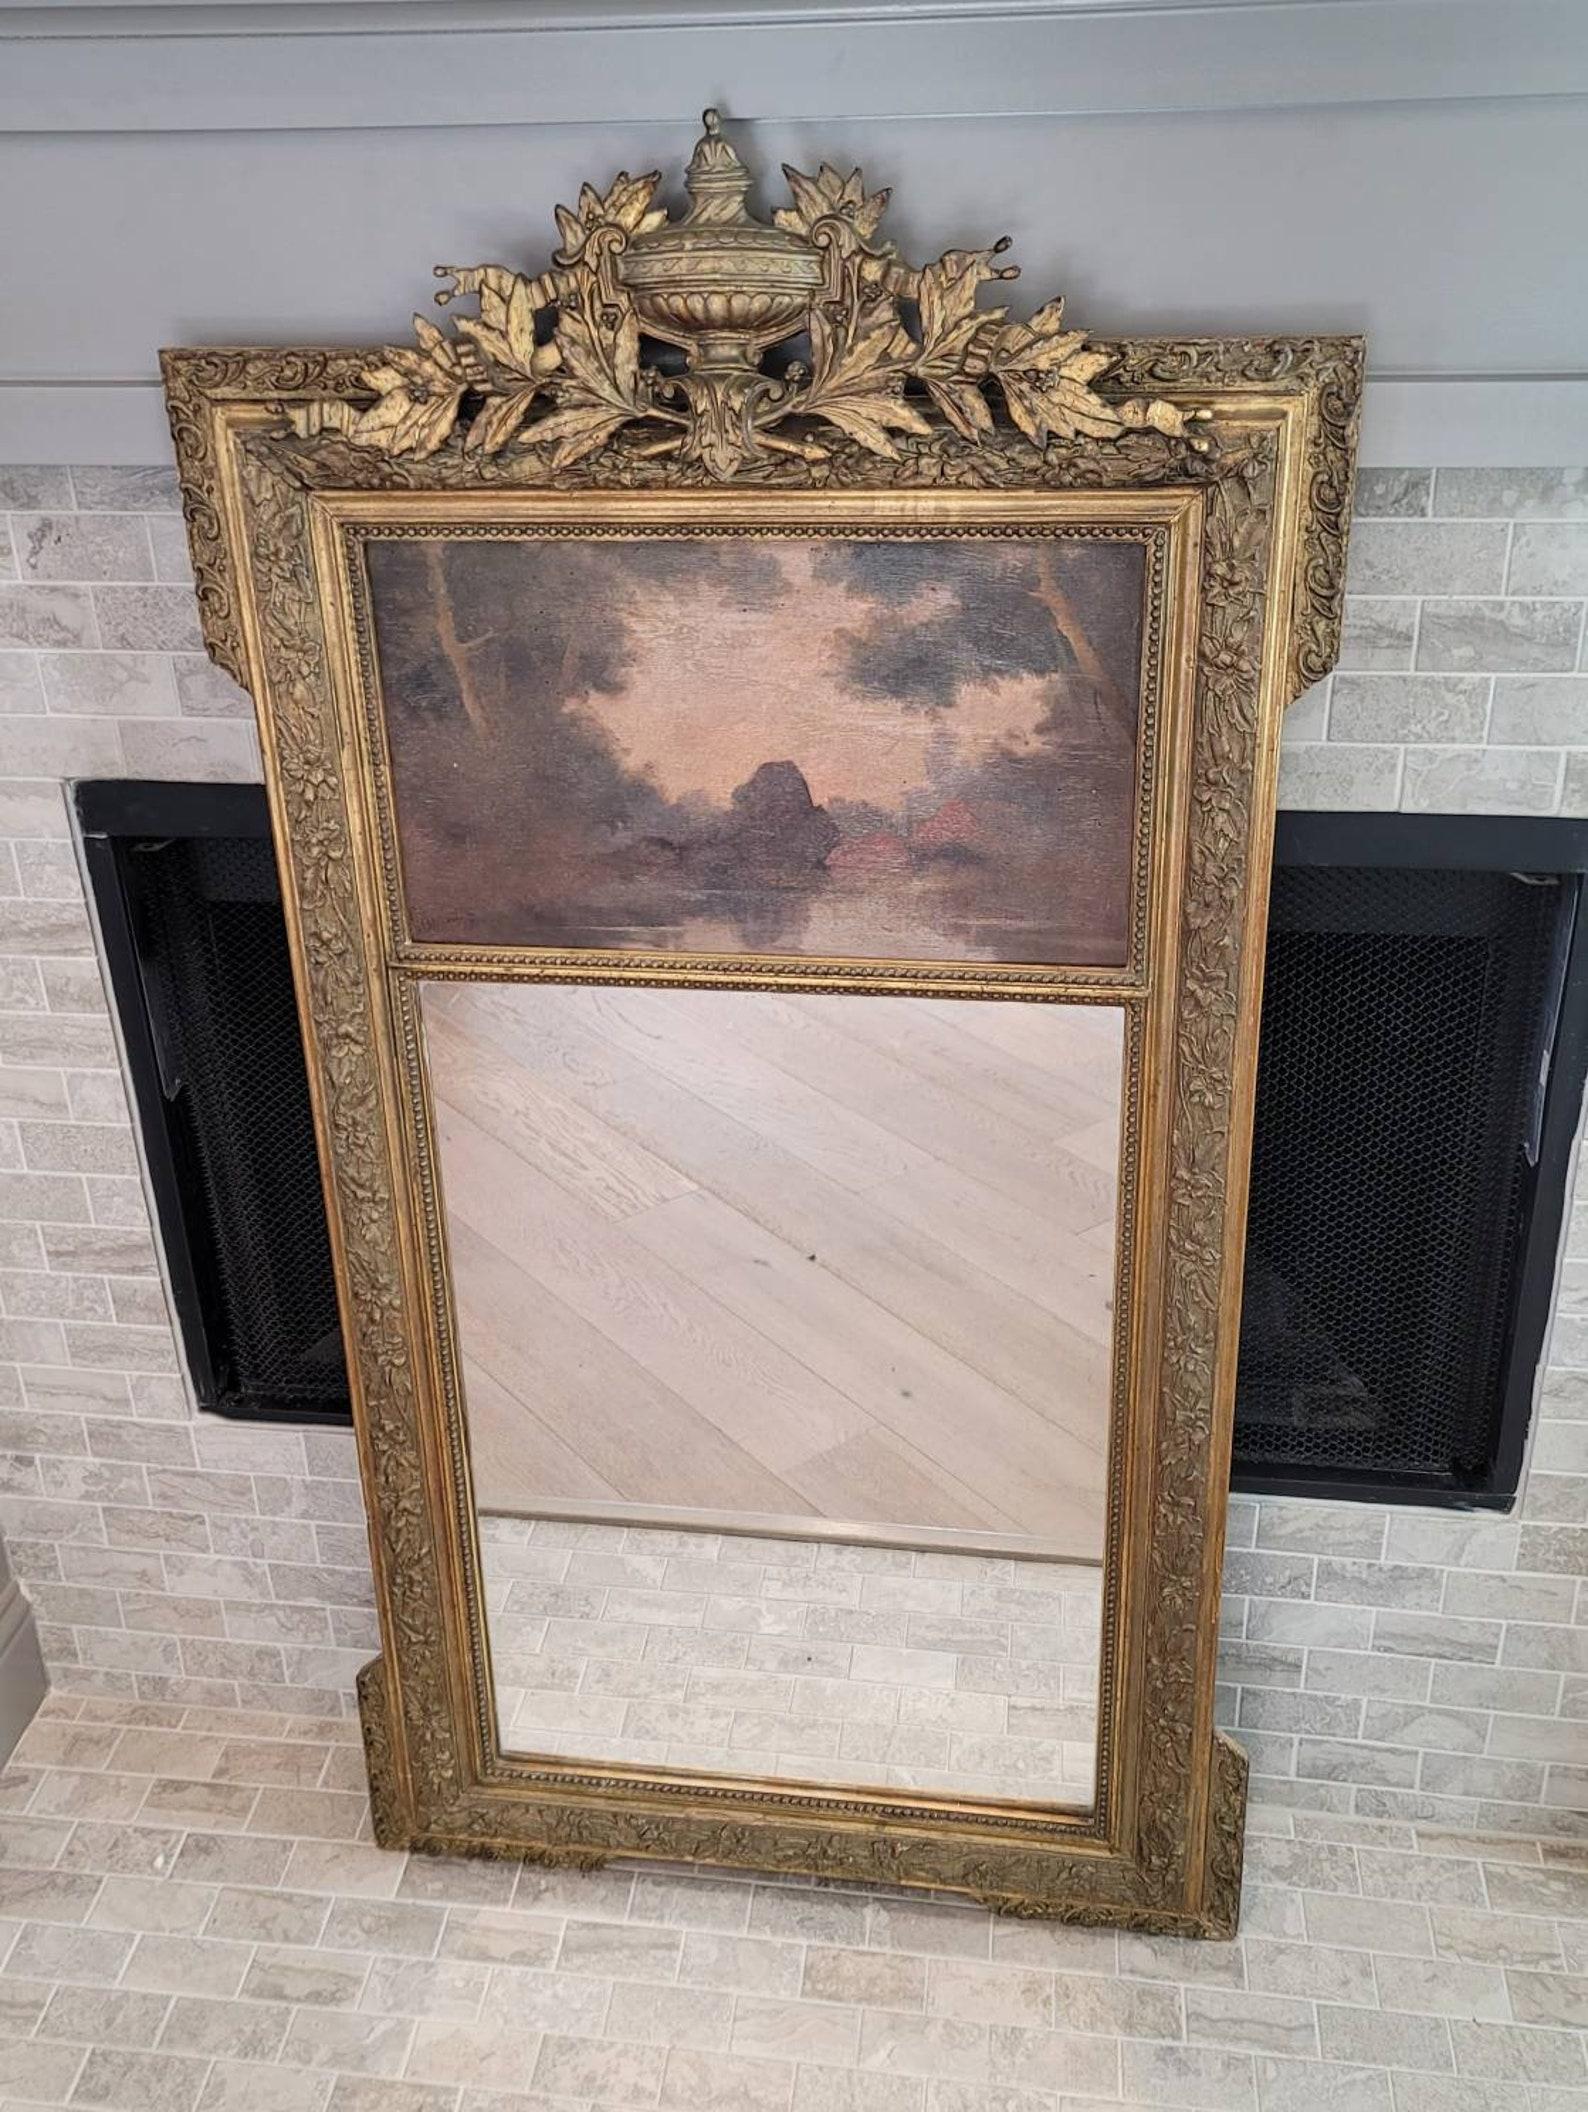 A stunning Belle Époque period (1871-1914) hand carved and painted antique, circa 1890, French trumeau mirror.

Born in France around the turn of the late 19th / early 20th century, beautifully hand-crafted in elegantly refined and luxurious Louis